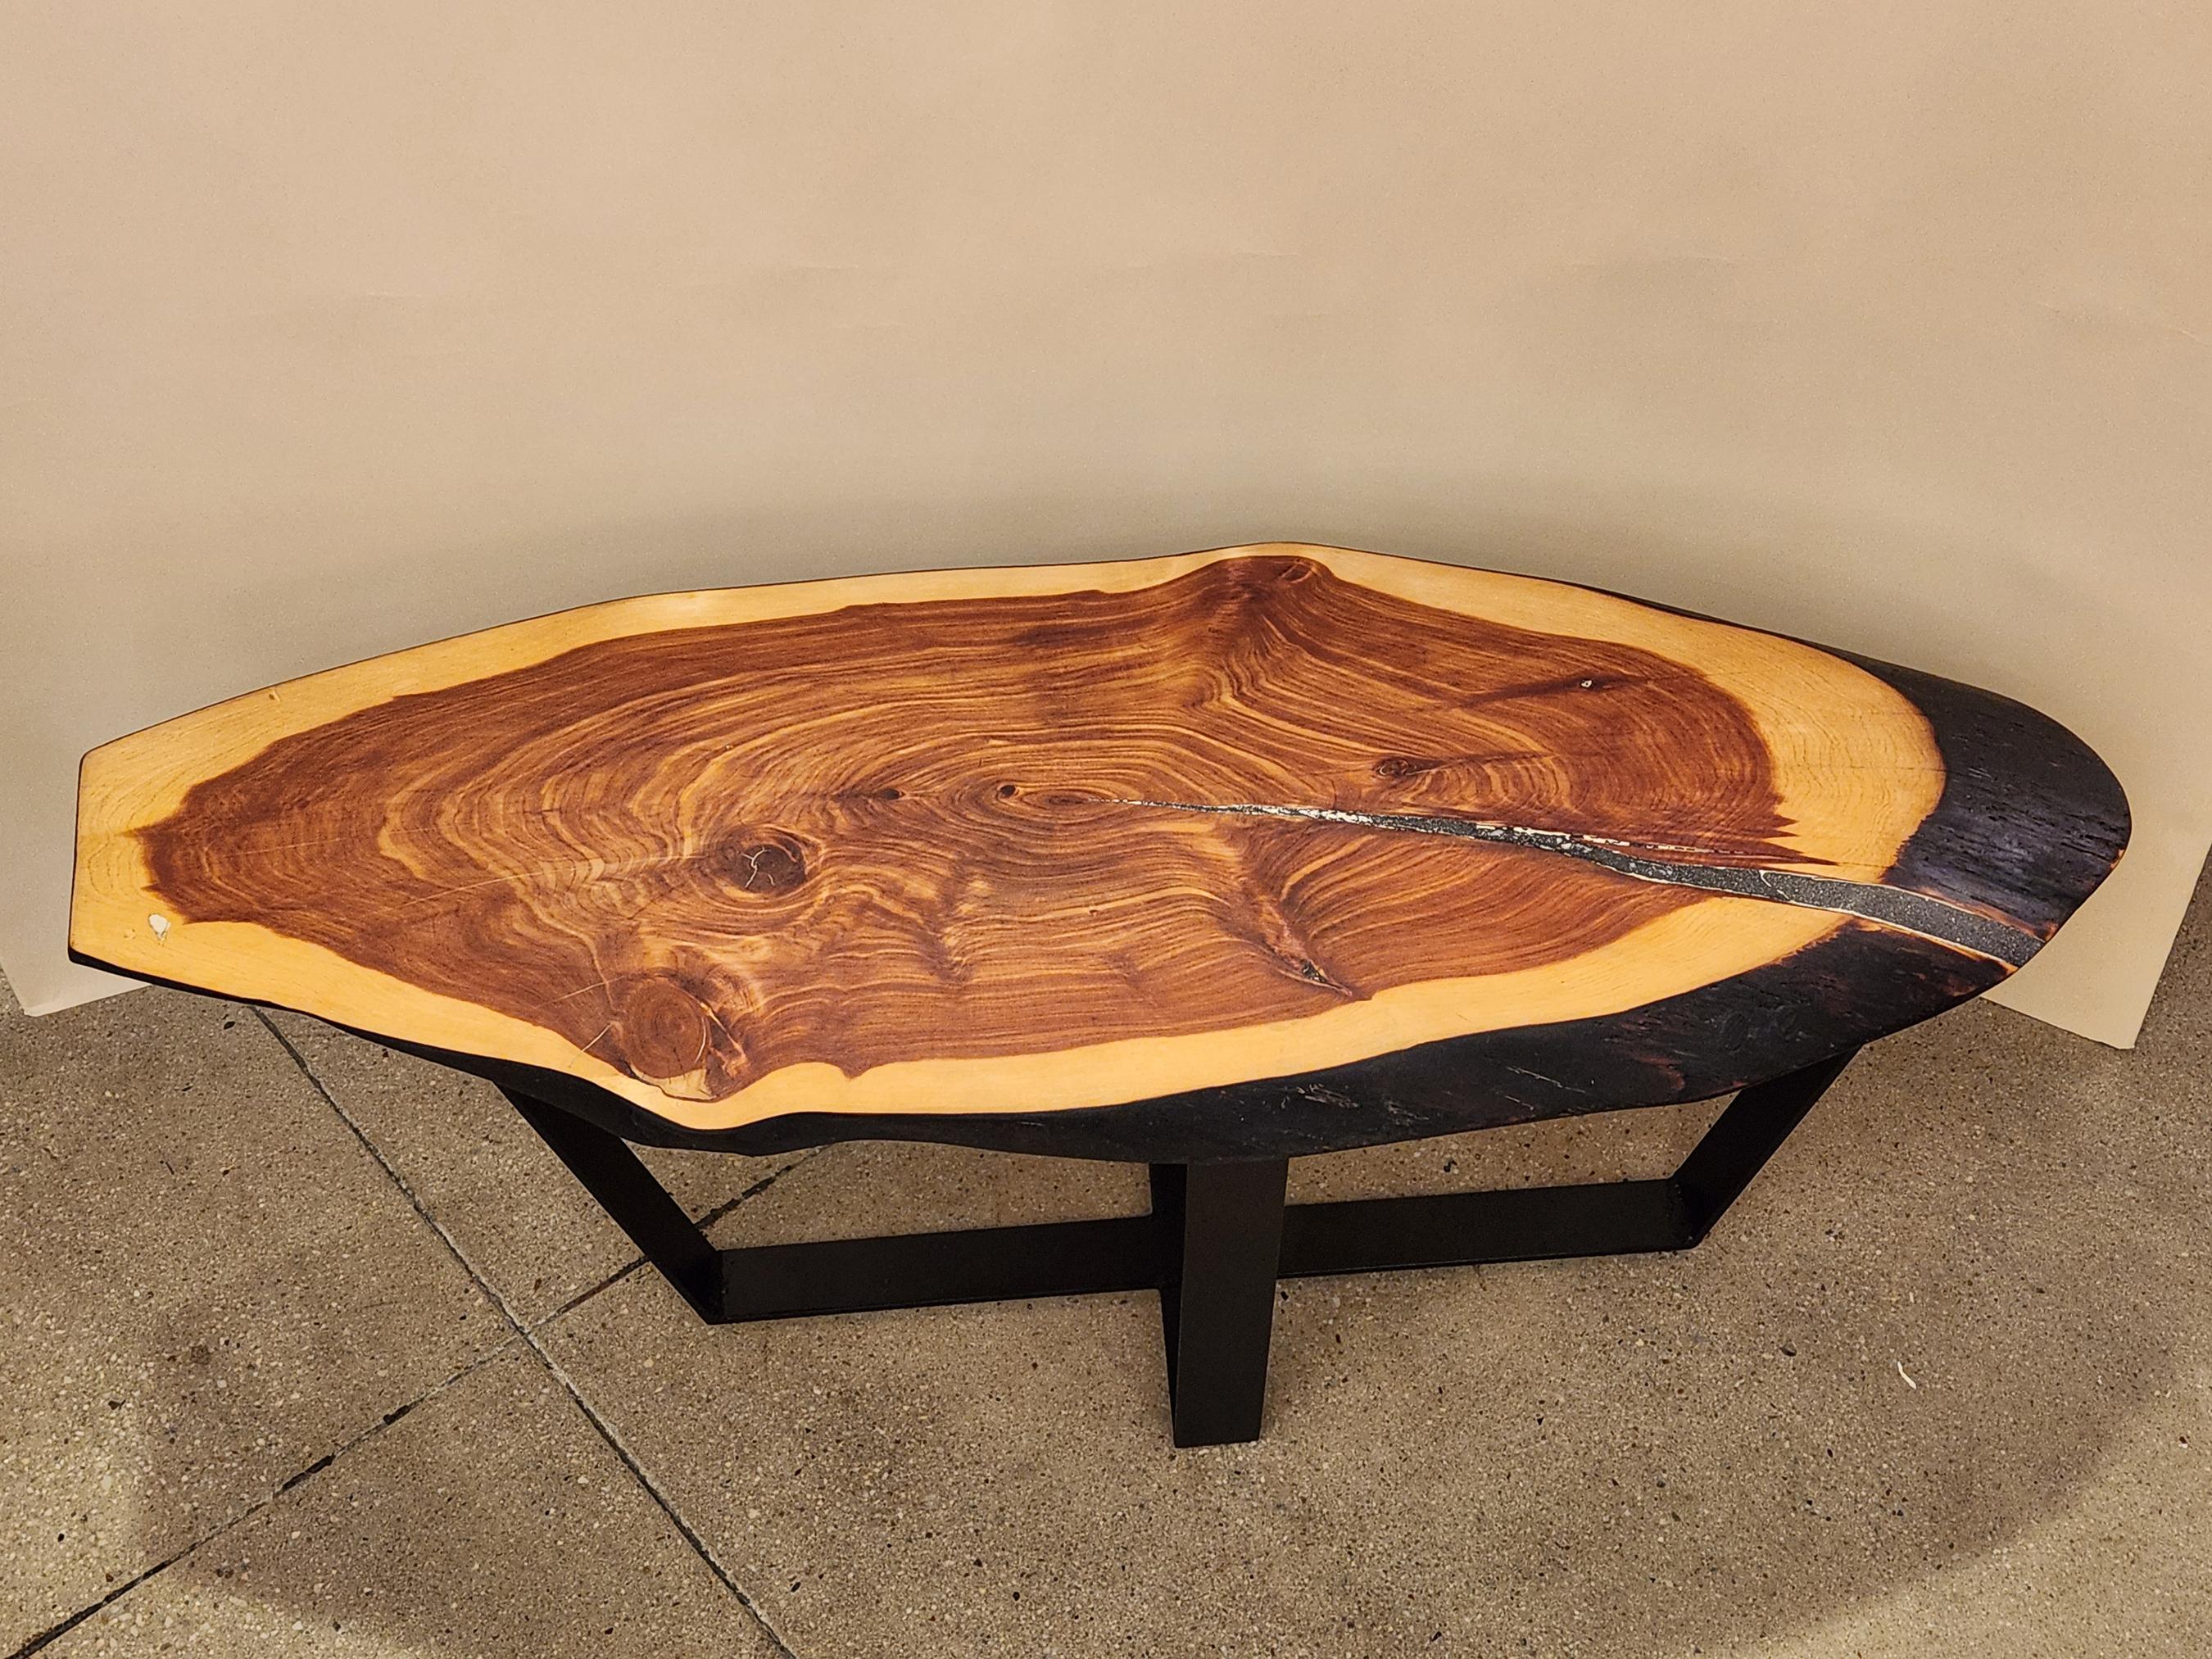 This cookie slab coffee table is a unique piece that is both functional and artisanal and offers an eye catching display.
 
 It was designed by Creation Therrien. It is made from red cedar wood with a crack that was filled with a quartz and